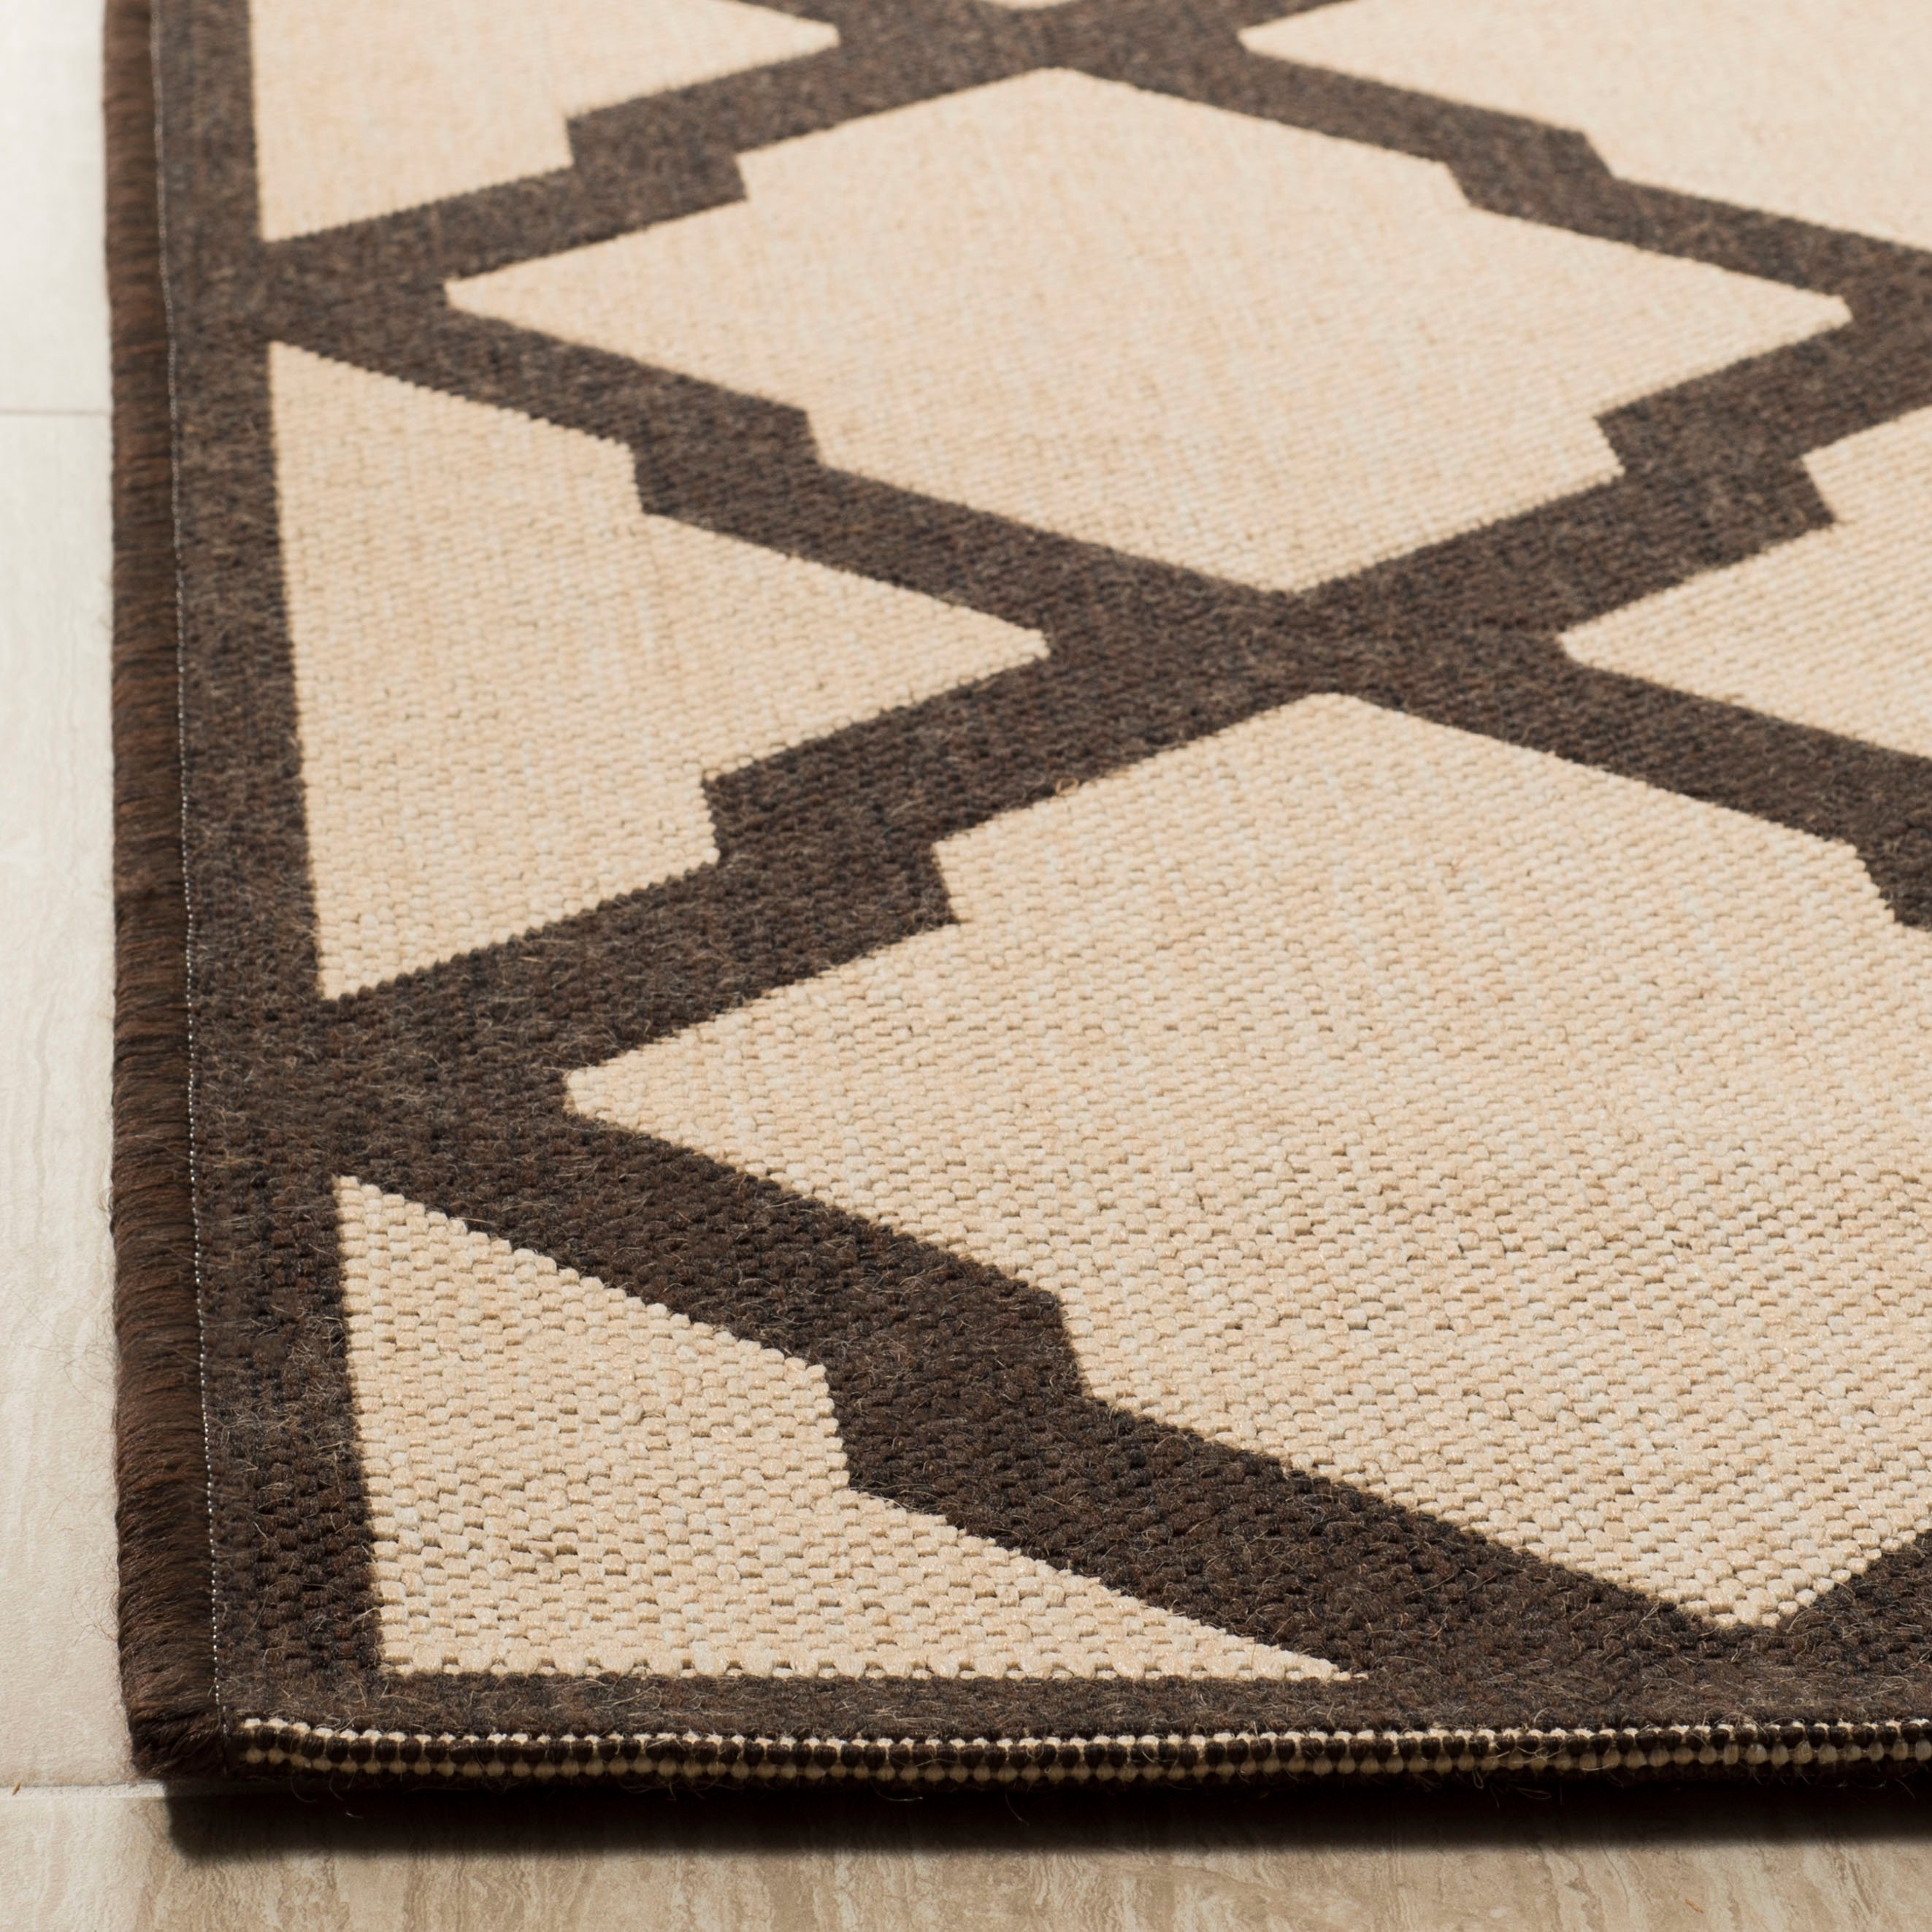 Arlo Home Indoor/Outdoor Woven Area Rug, LND122B, Natural/Brown,  8' X 10' - Image 1